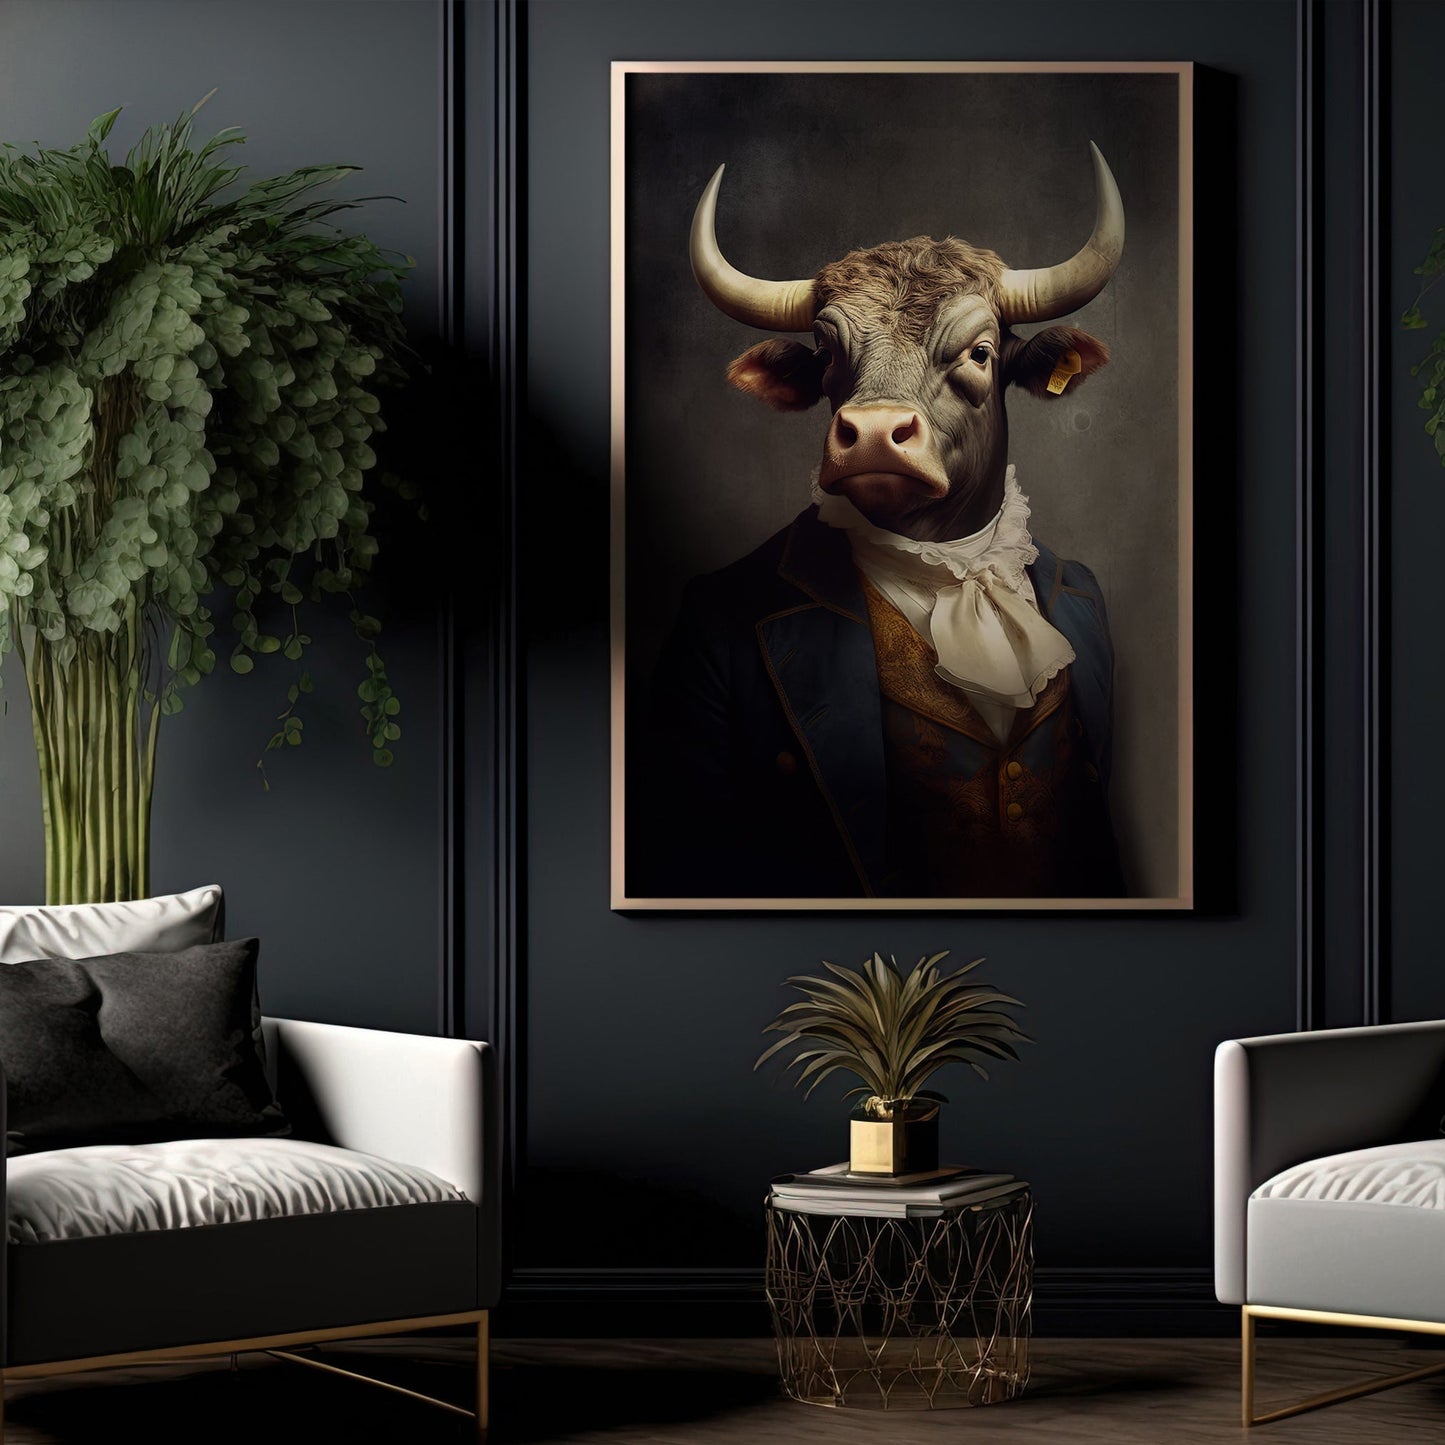 Mr. Bull In Suit Earl, Victorian Highland Cow Canvas Painting, Victorian Animal Wall Art Decor - Highland Cow Poster Gift